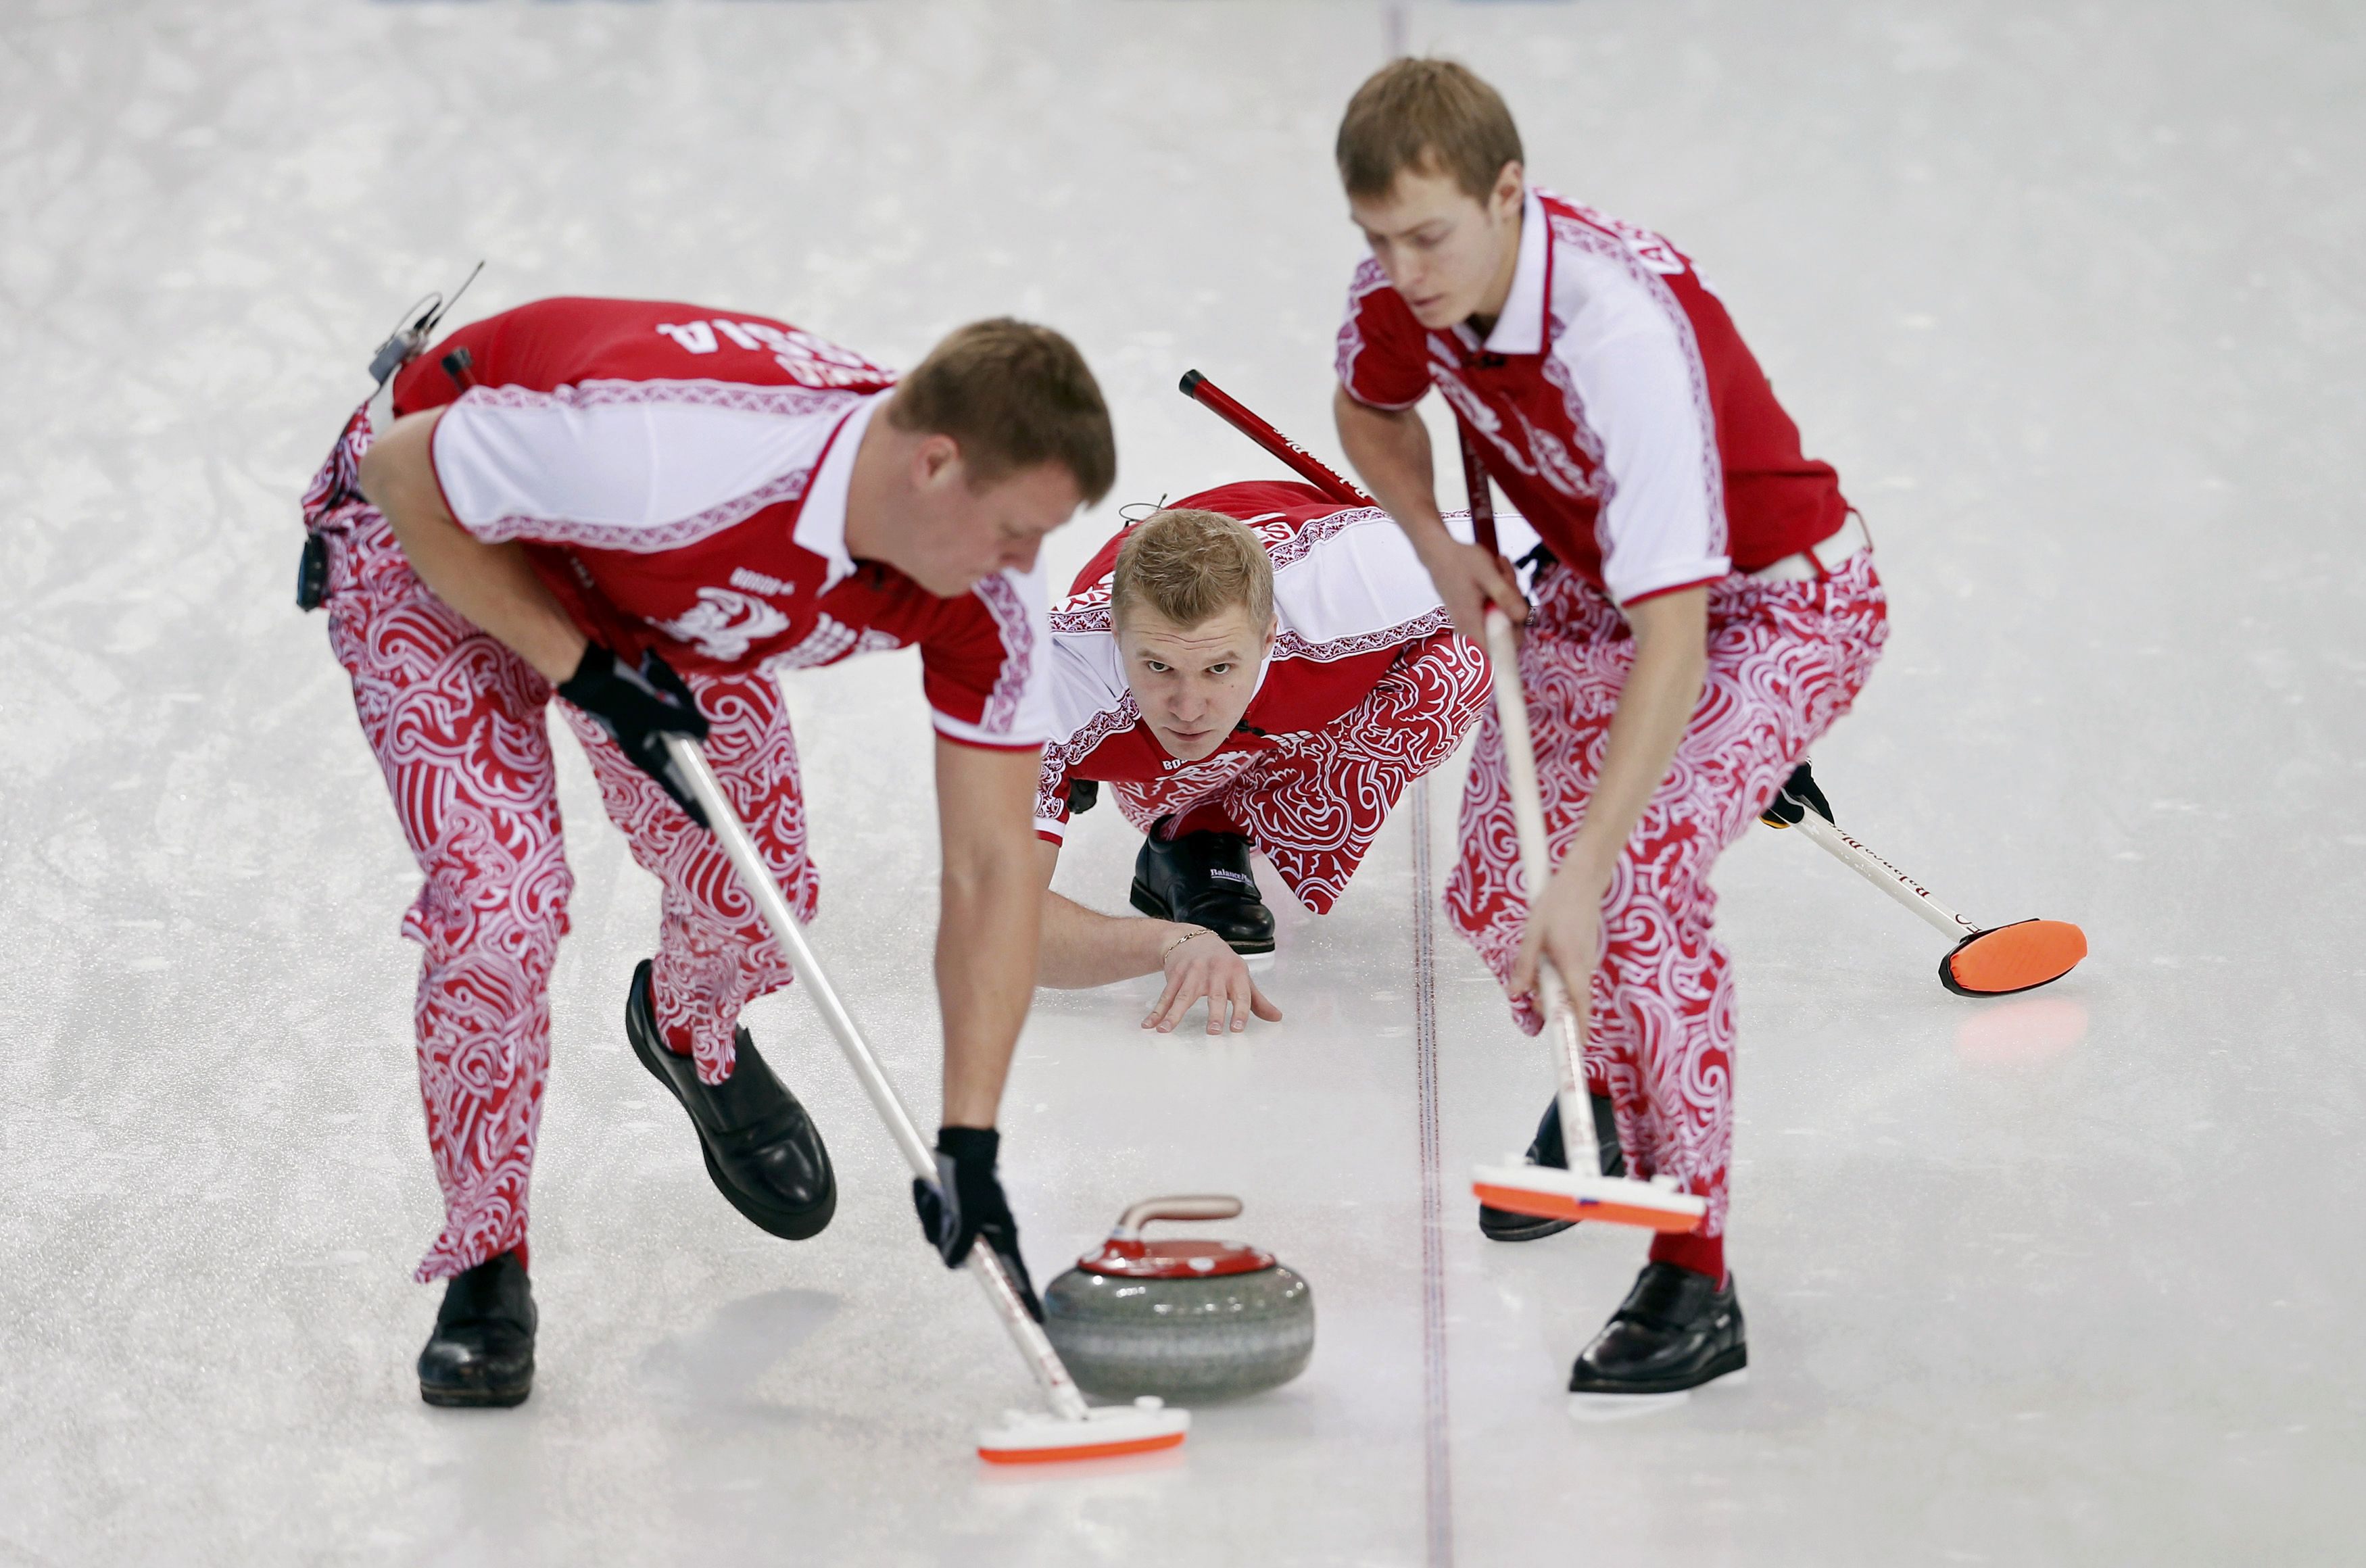 Russian Curling Team At The Olympics In Sochi Wallpaper